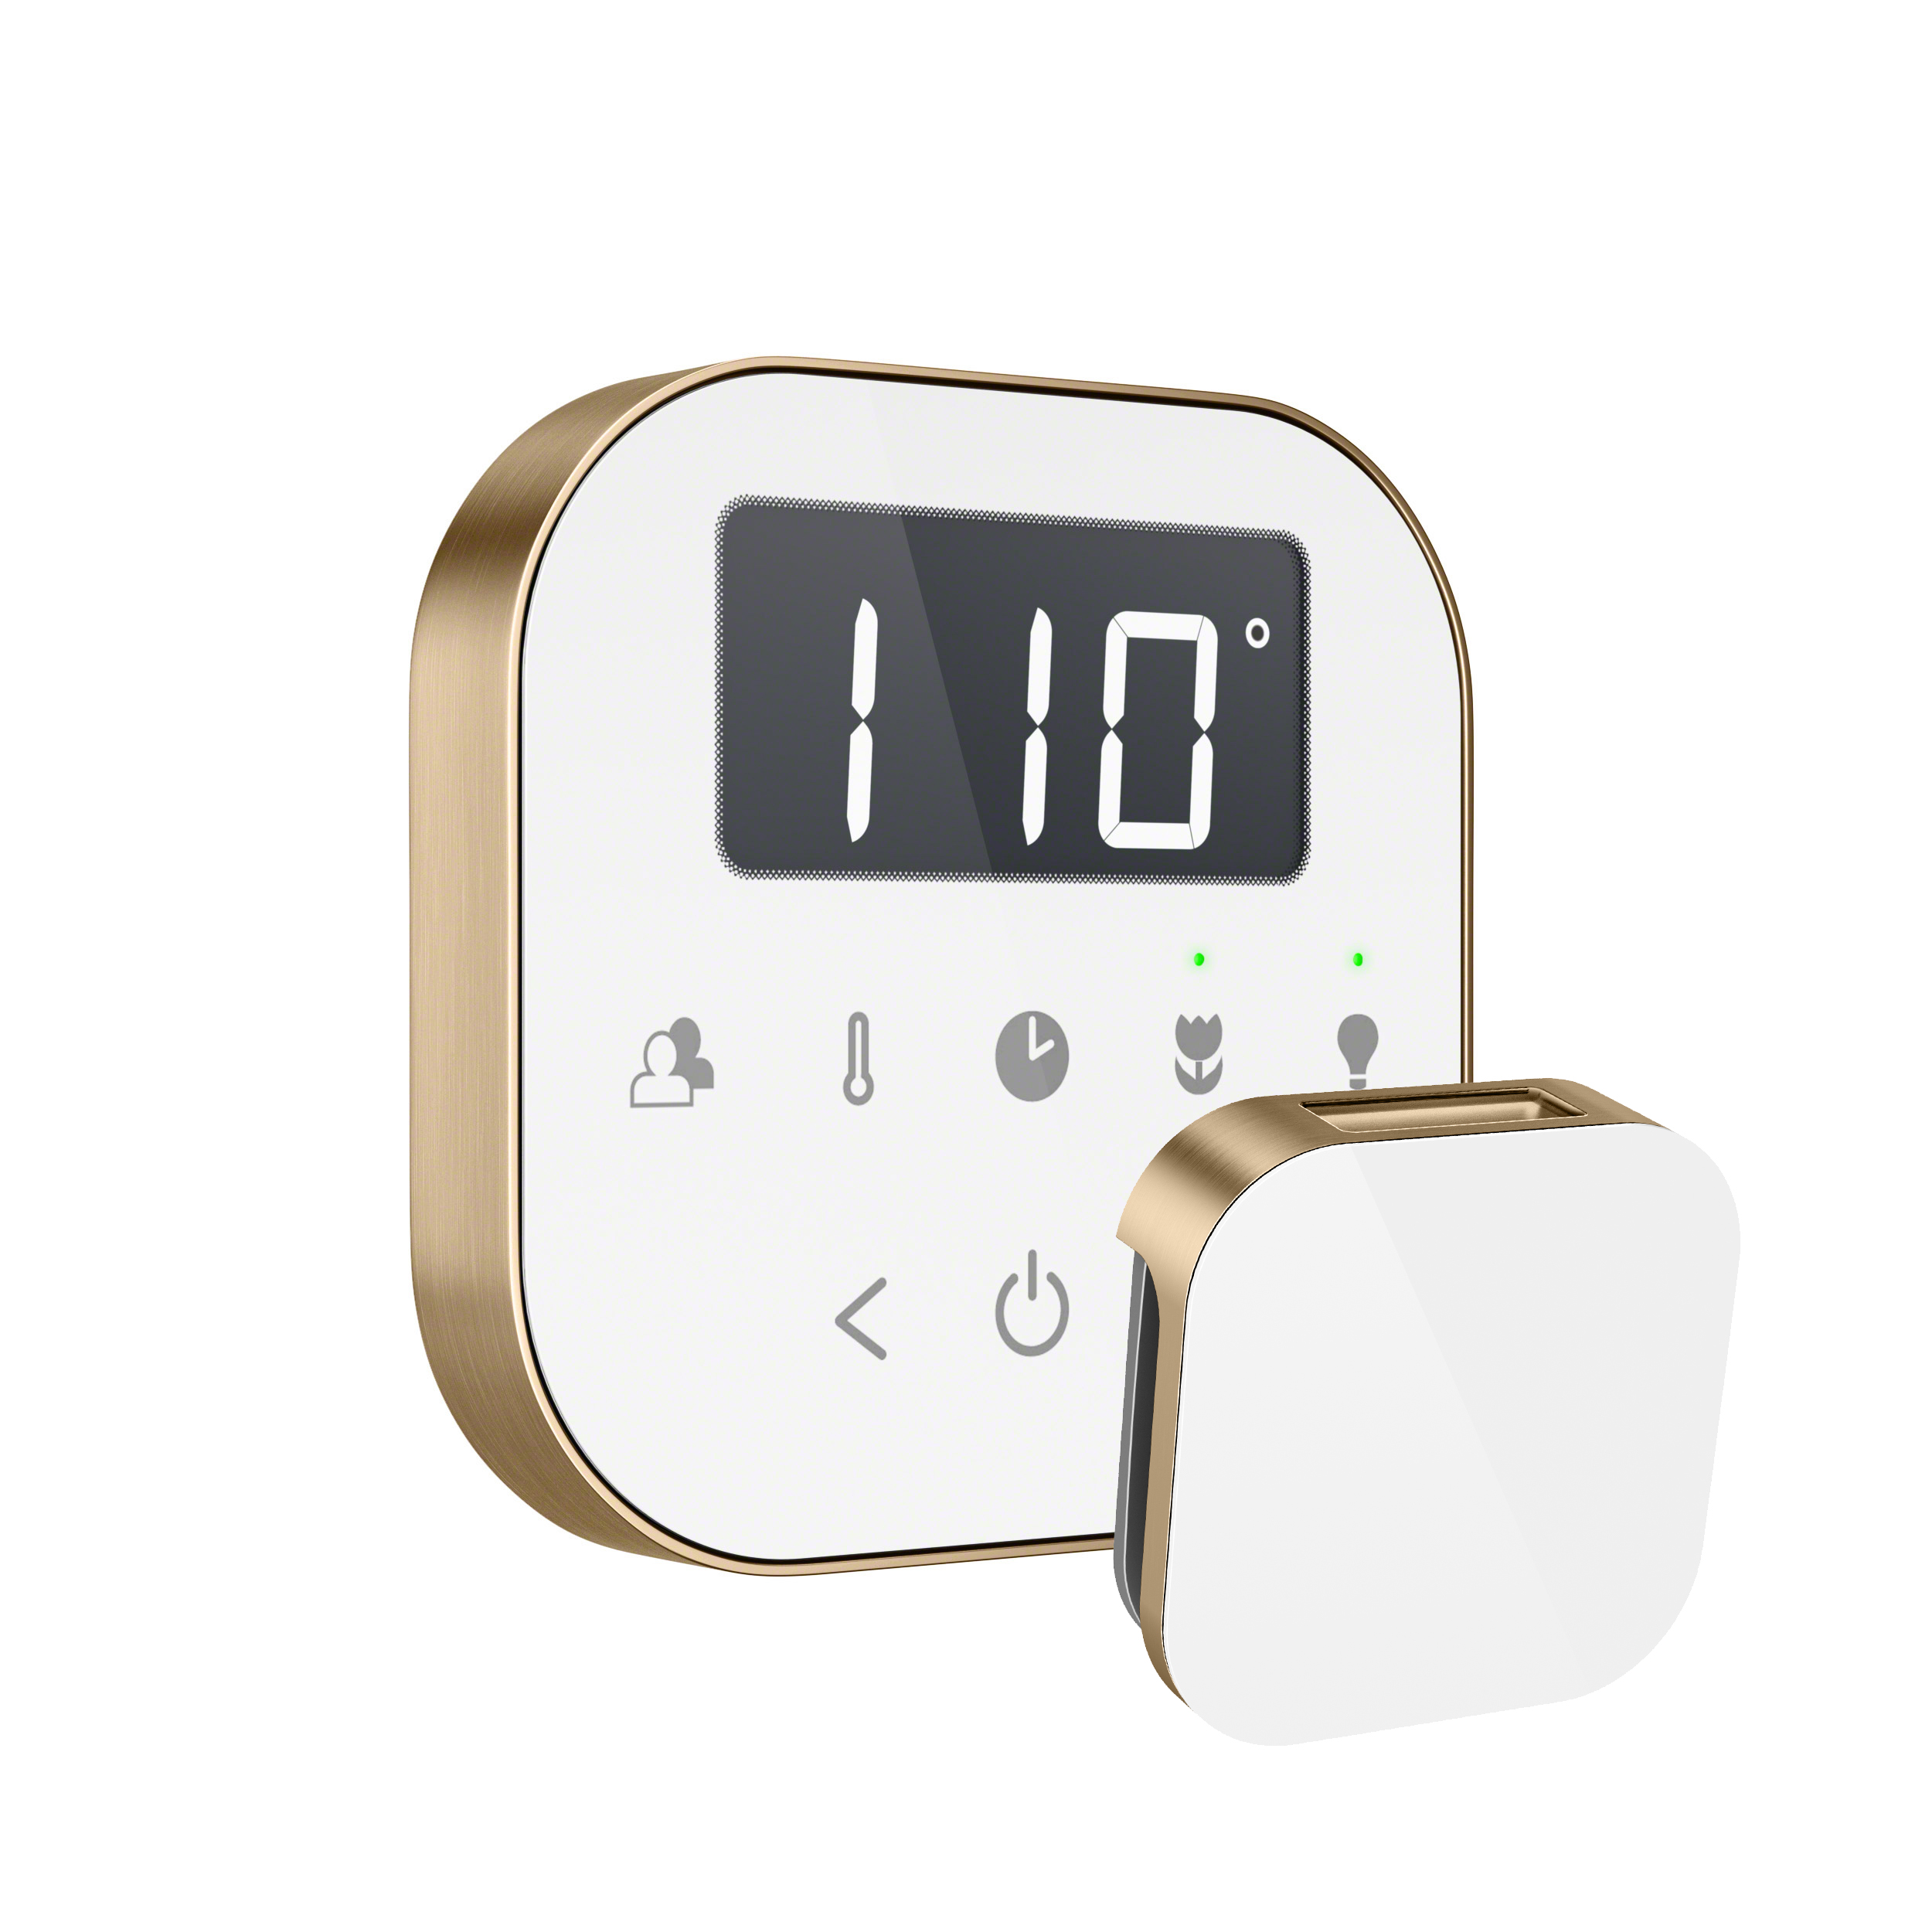 Mr Steam AIRTWH-BB AirTempo Steam Shower Control in White with Brushed Bronze